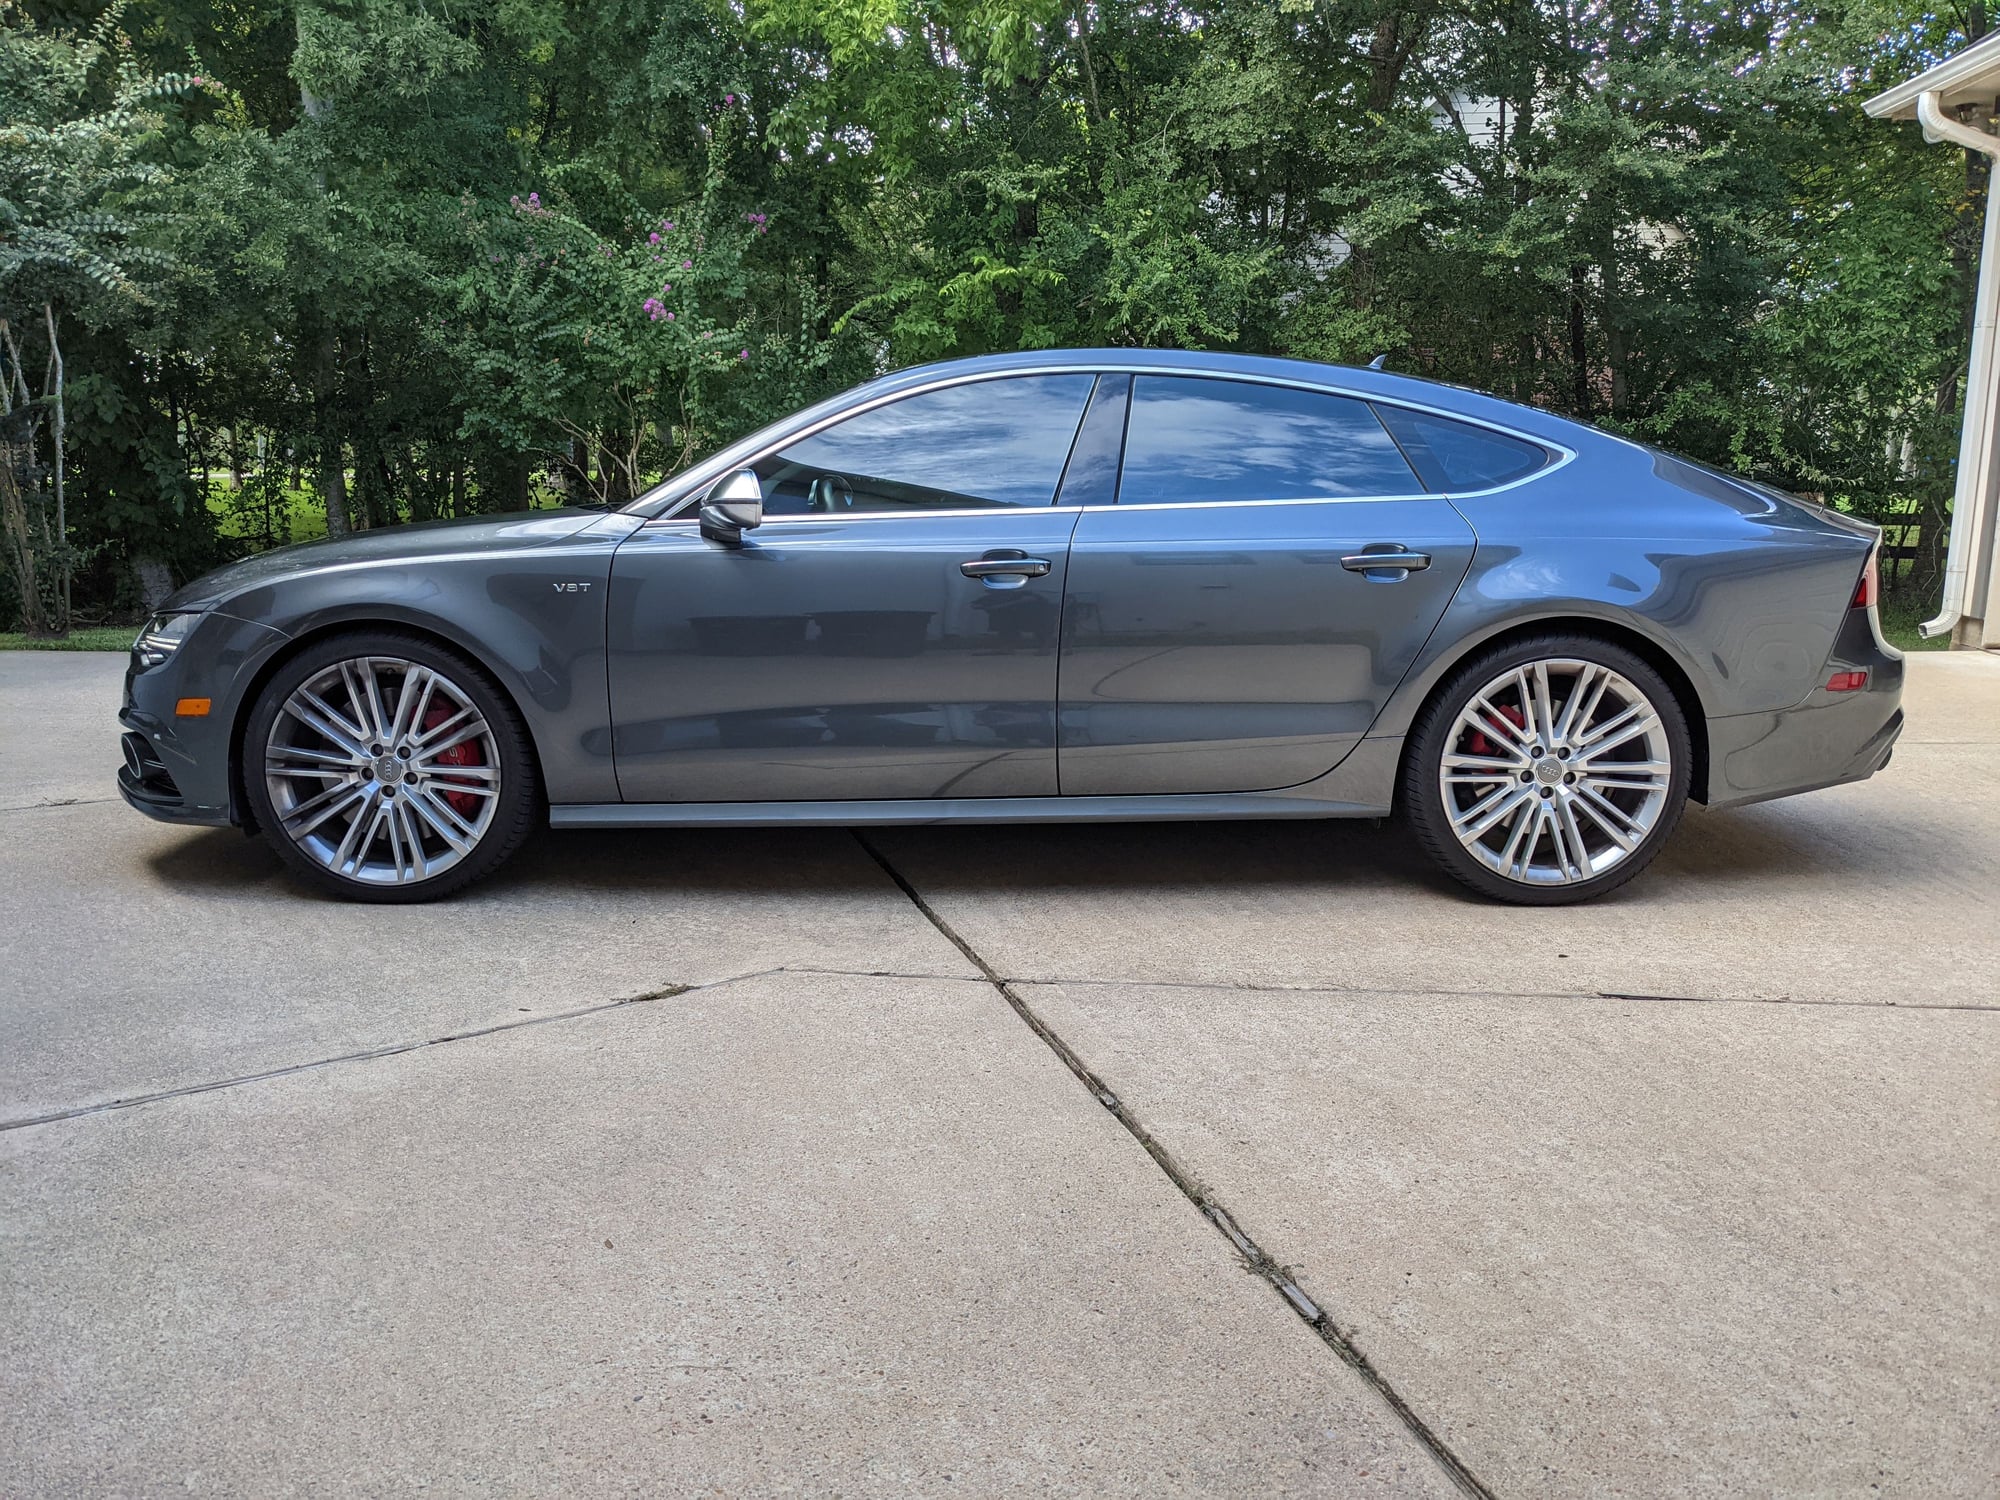 2018 Audi S7 - 2018 Audi S7 Prestige with all options (last of the 4.0 V8 Twin Turbo) CERTIFIED - Used - VIN WAU2FAFC0JN050753 - 15,800 Miles - 8 cyl - 4WD - Automatic - Sedan - Gray - Houston, TX 77002, United States